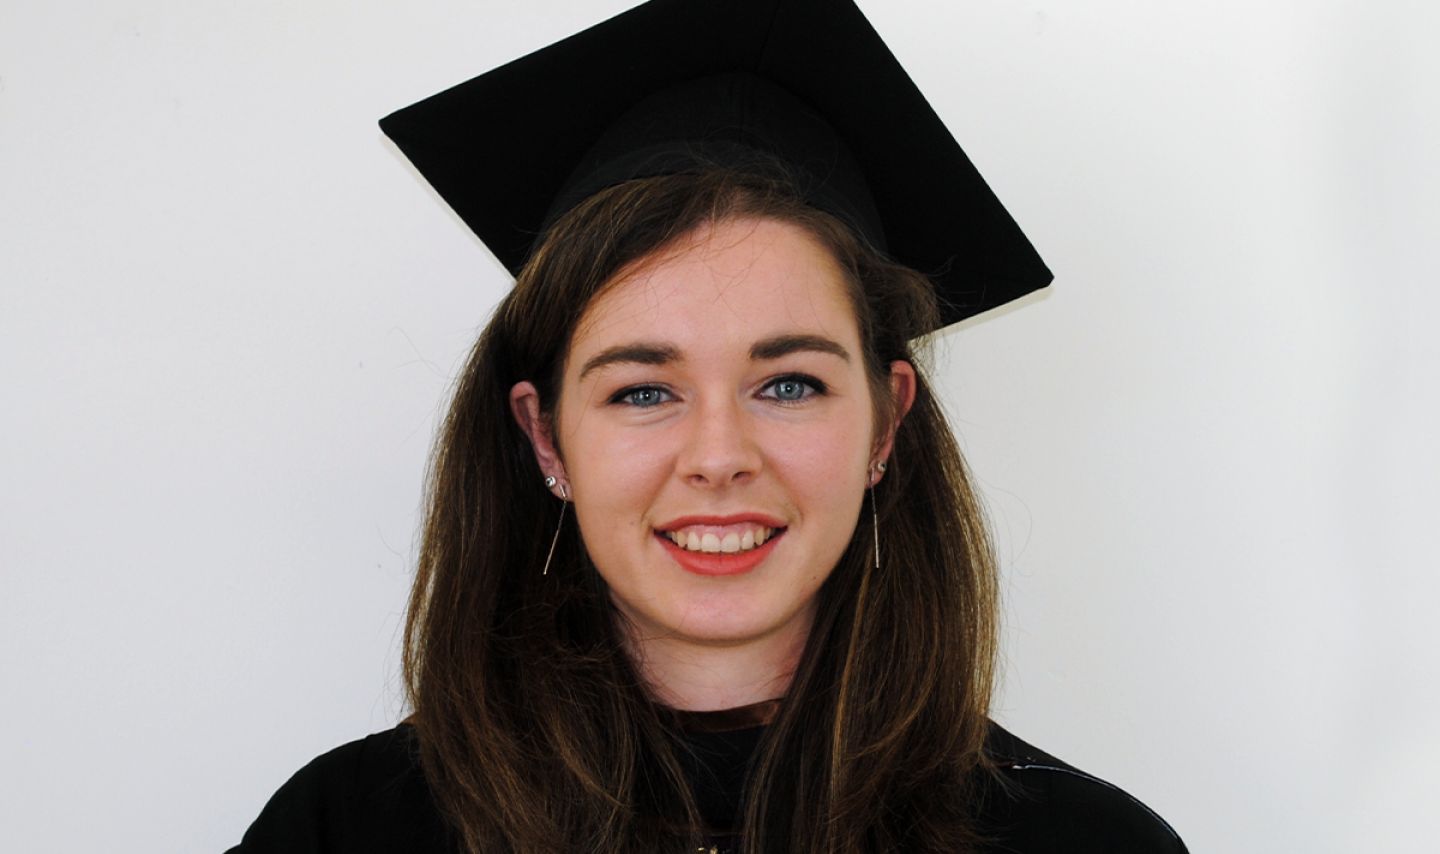 Waterford became 'home' for Visual Communications graduate Shauna